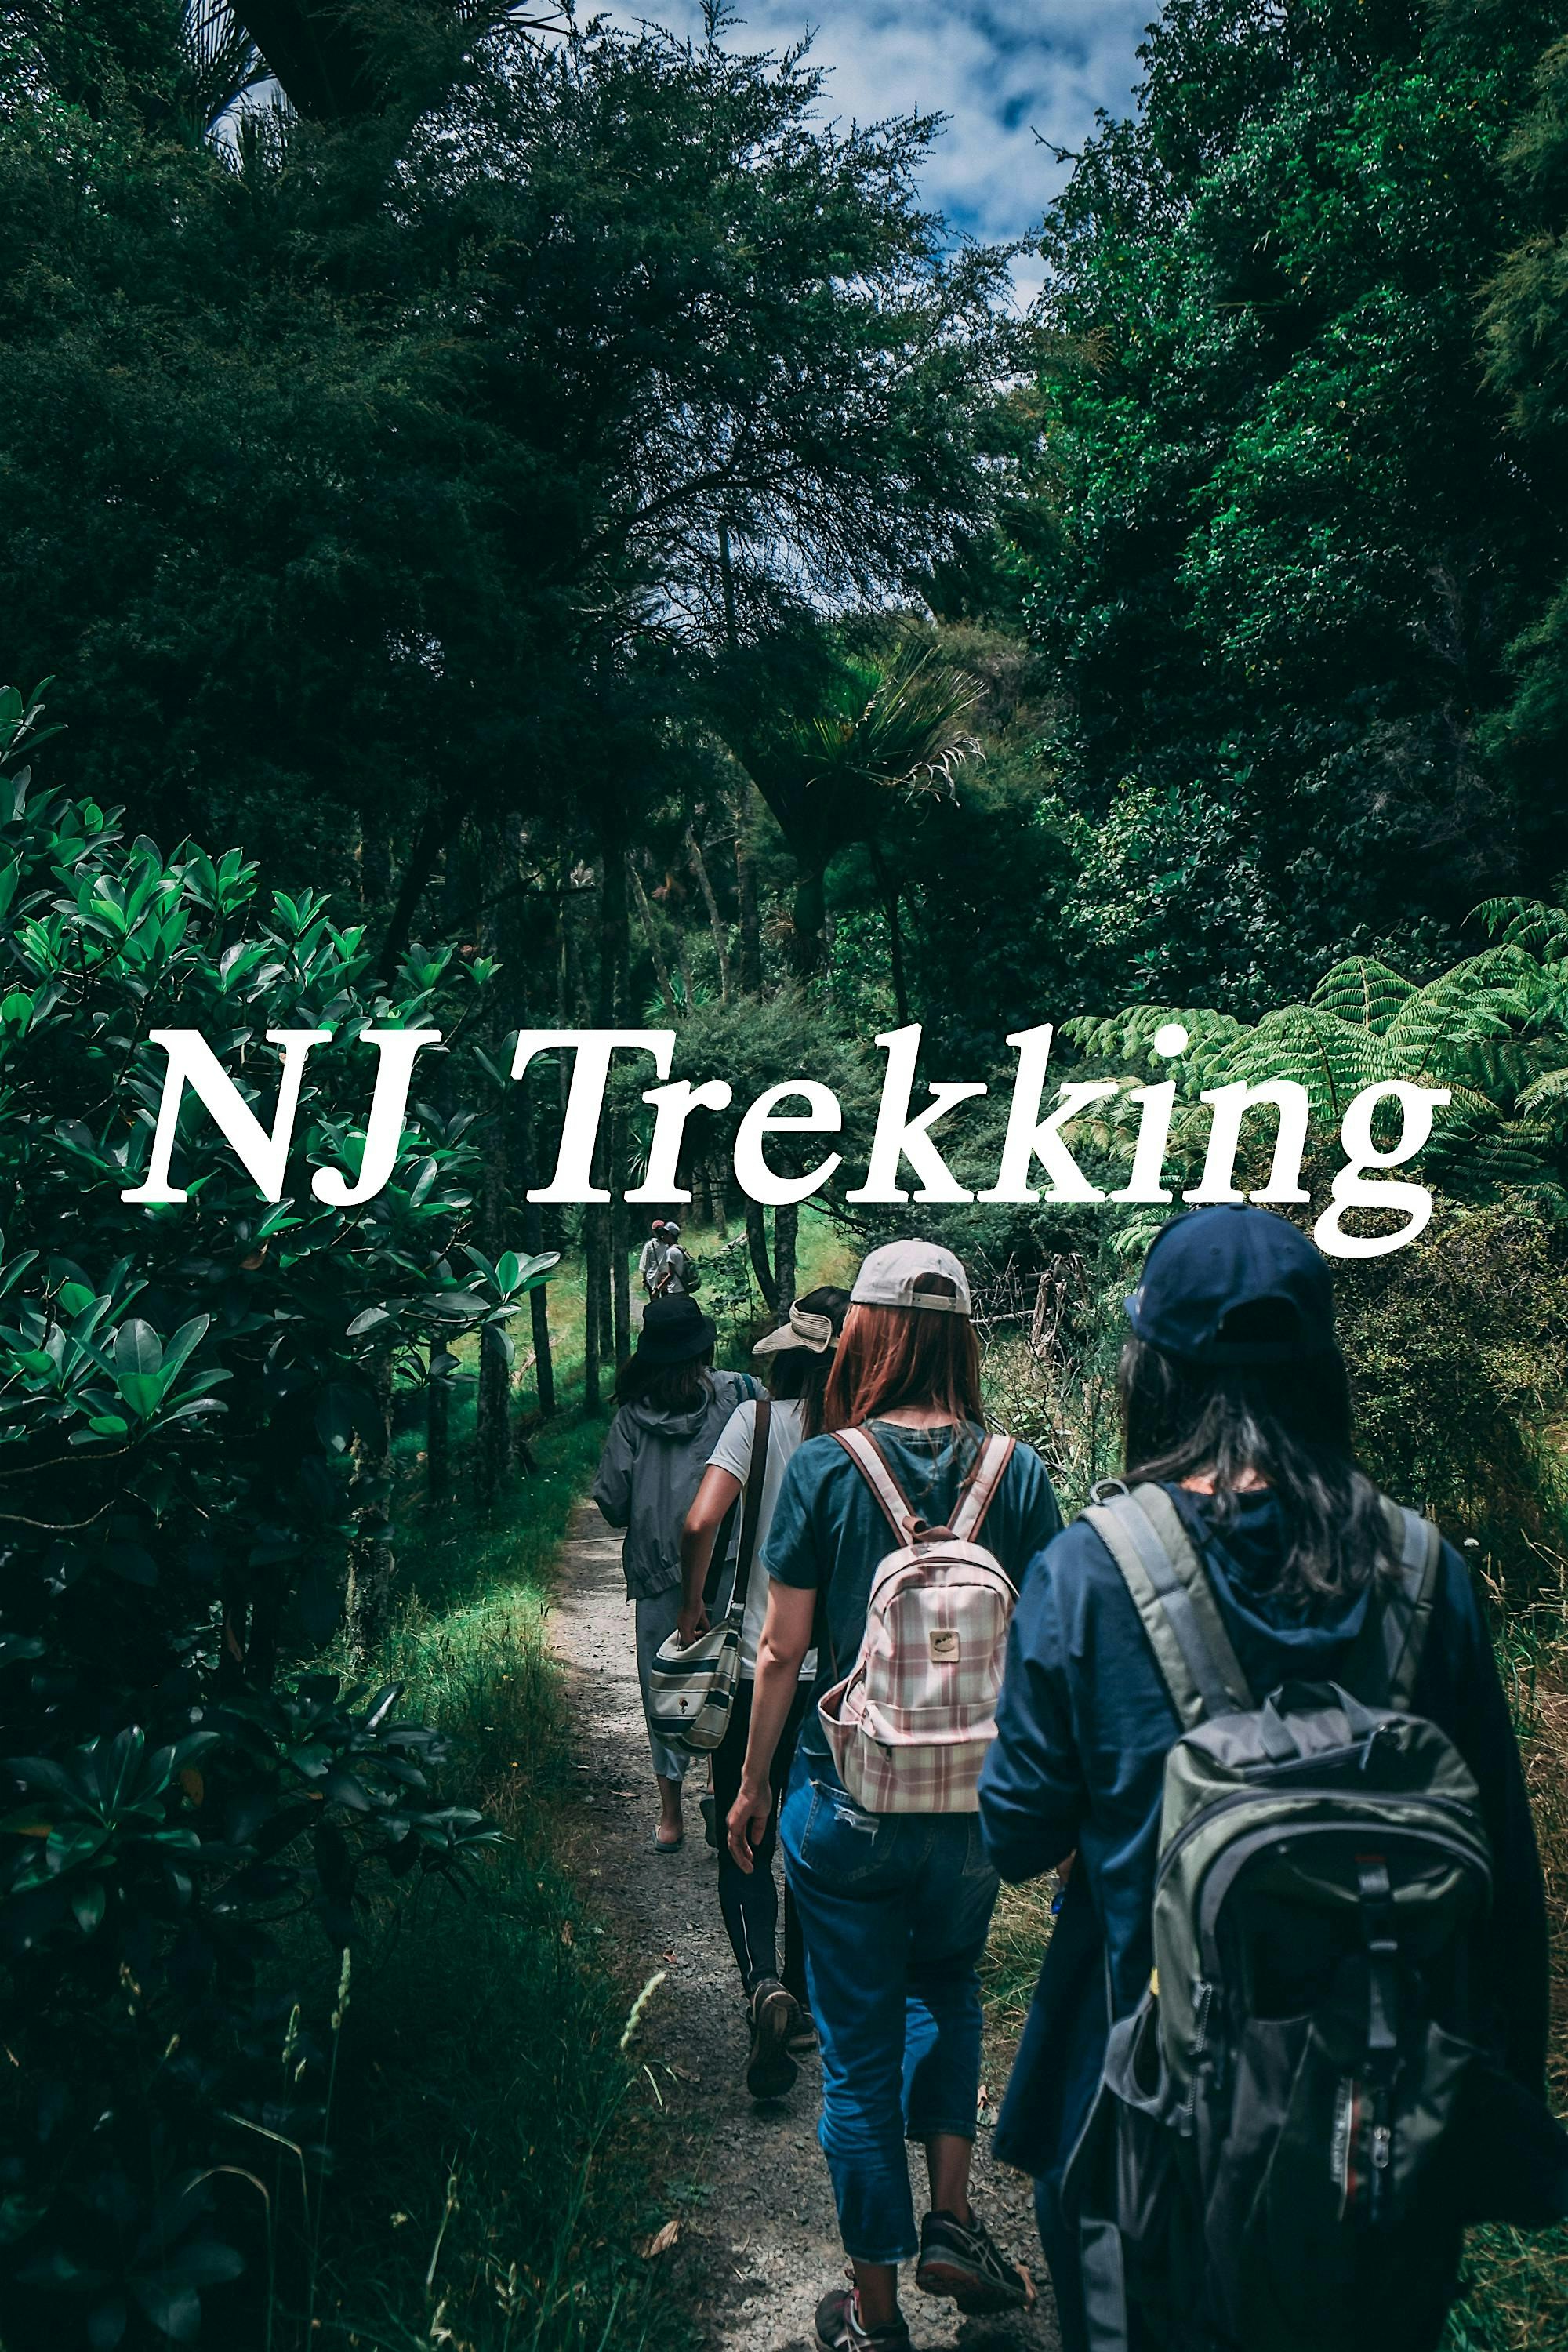 NJ Trekking & Painting |The Texture of Trees, Another Kind of Earth